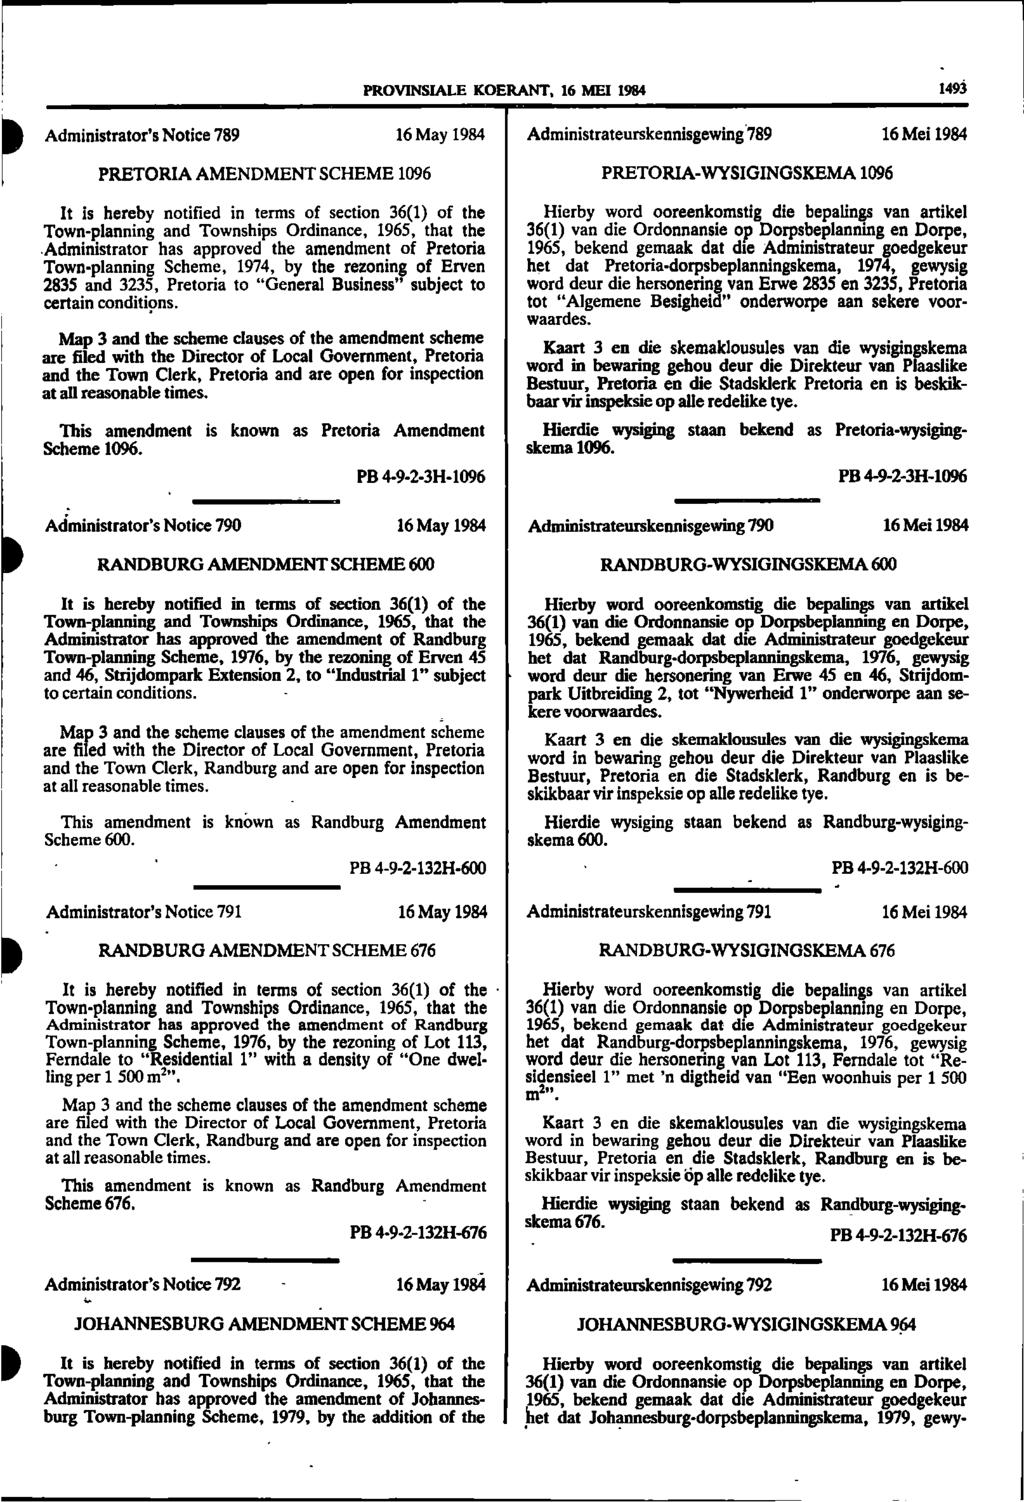 PROVINSIALE KOERANT, 16 M EI 1984 1493 Administrator s Notice 789 PRETORIA AMENDMENT SCHEME 1096 It is hereby notified in terms of section 36(1) of the Town-planning and Townships Ordinance, 1965,